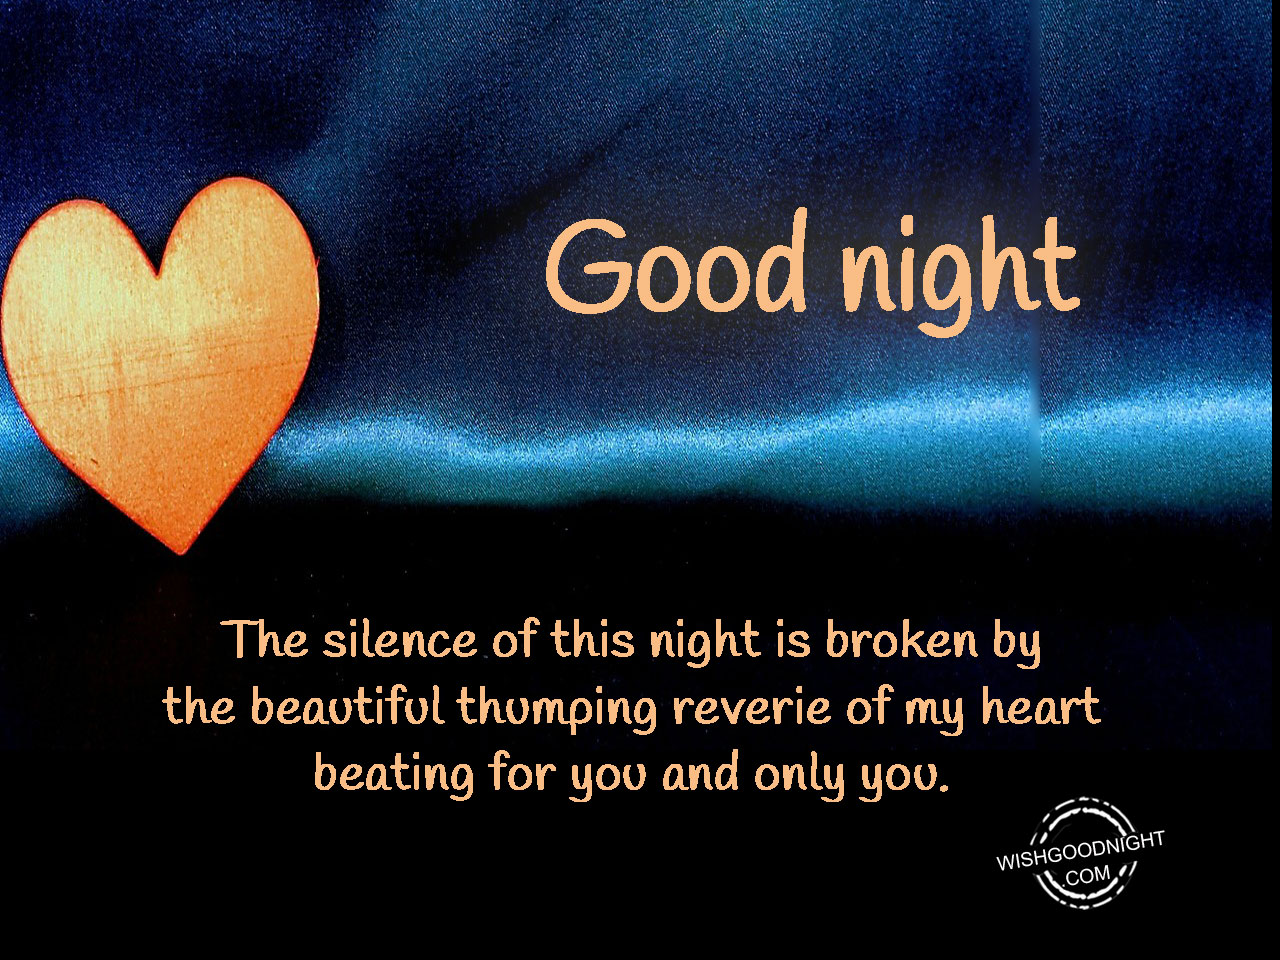 My heart beating for you - Good Night Pictures – WishGoodNight.com